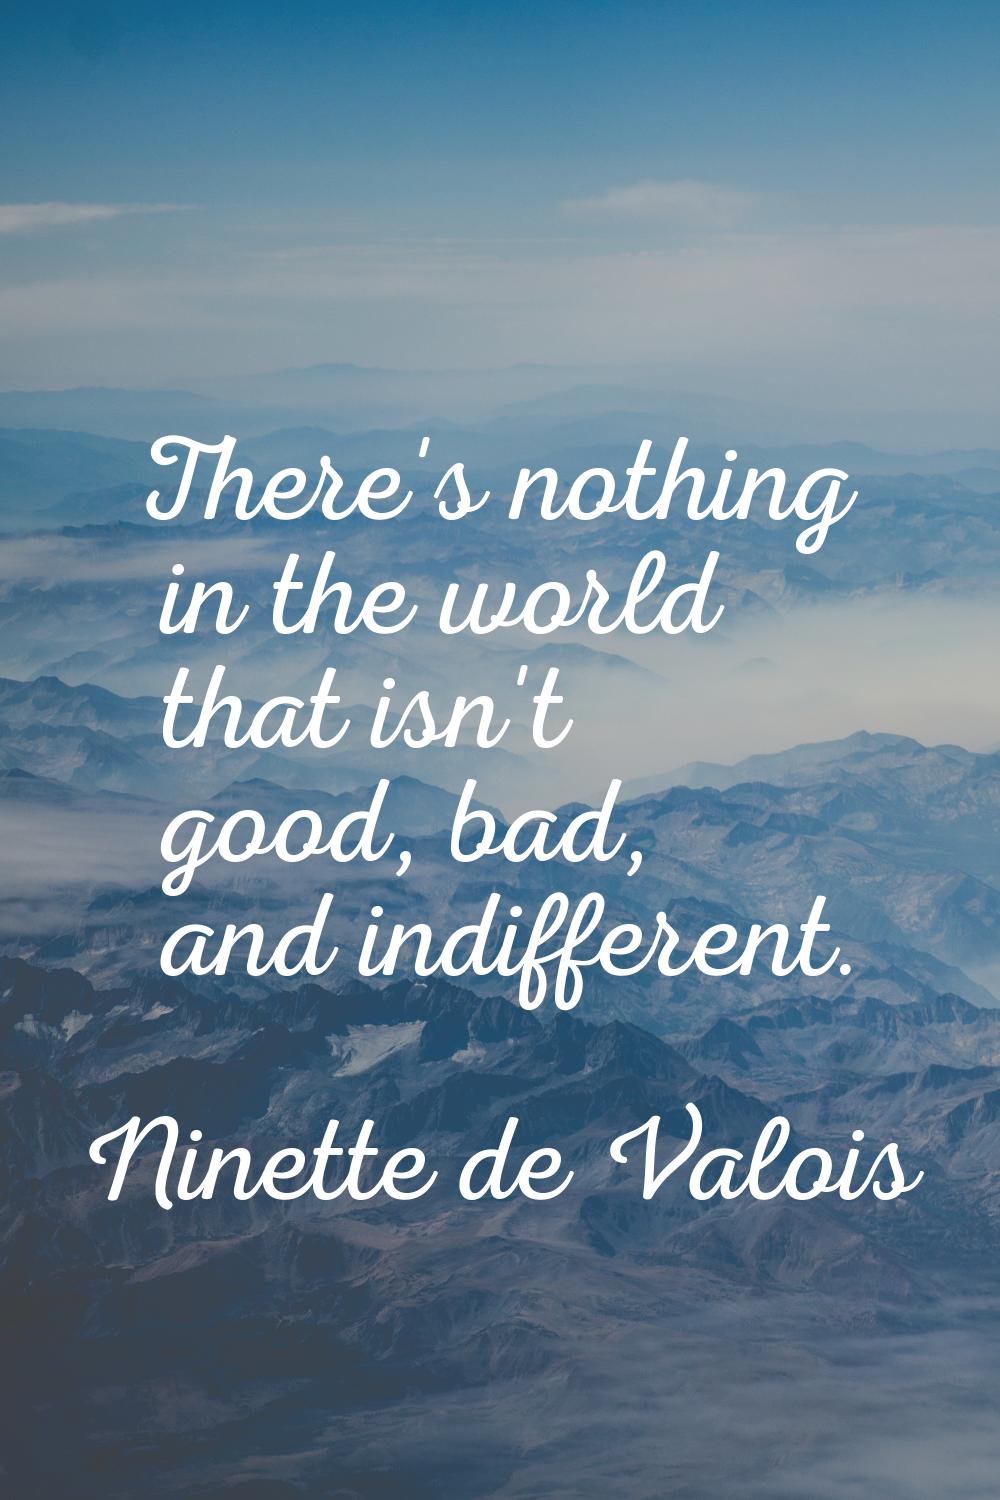 There's nothing in the world that isn't good, bad, and indifferent.